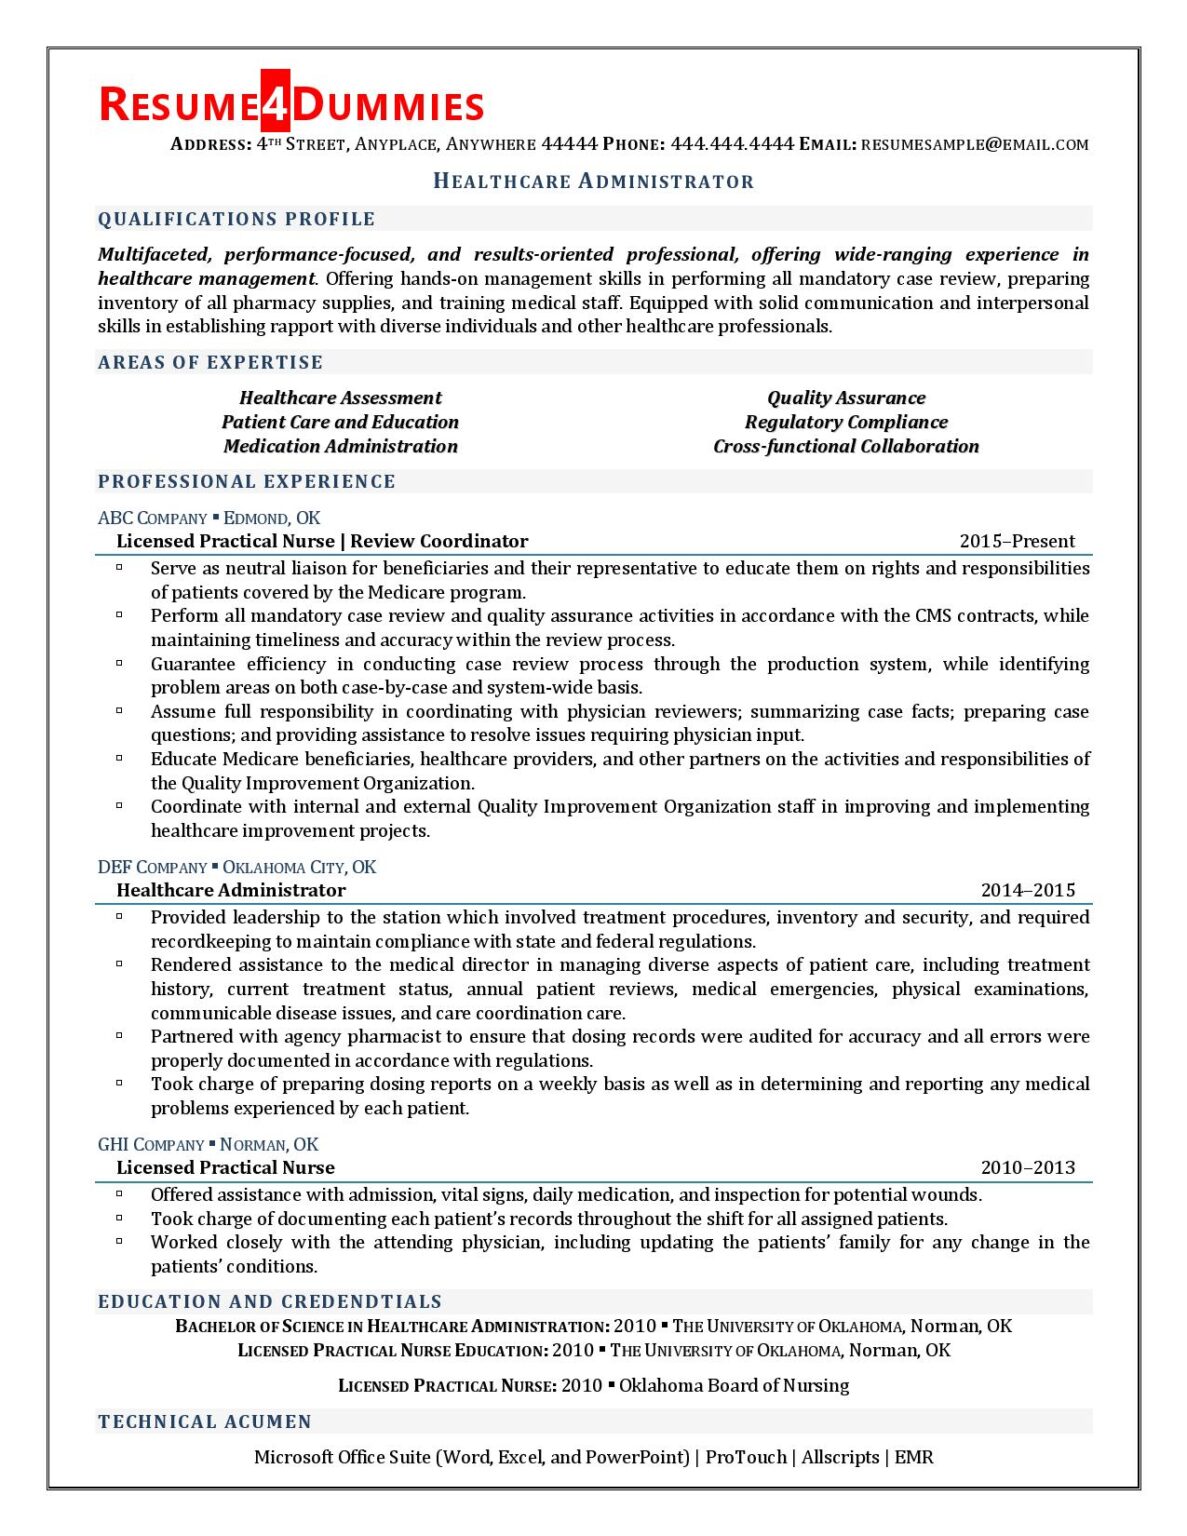 resume templates healthcare administration